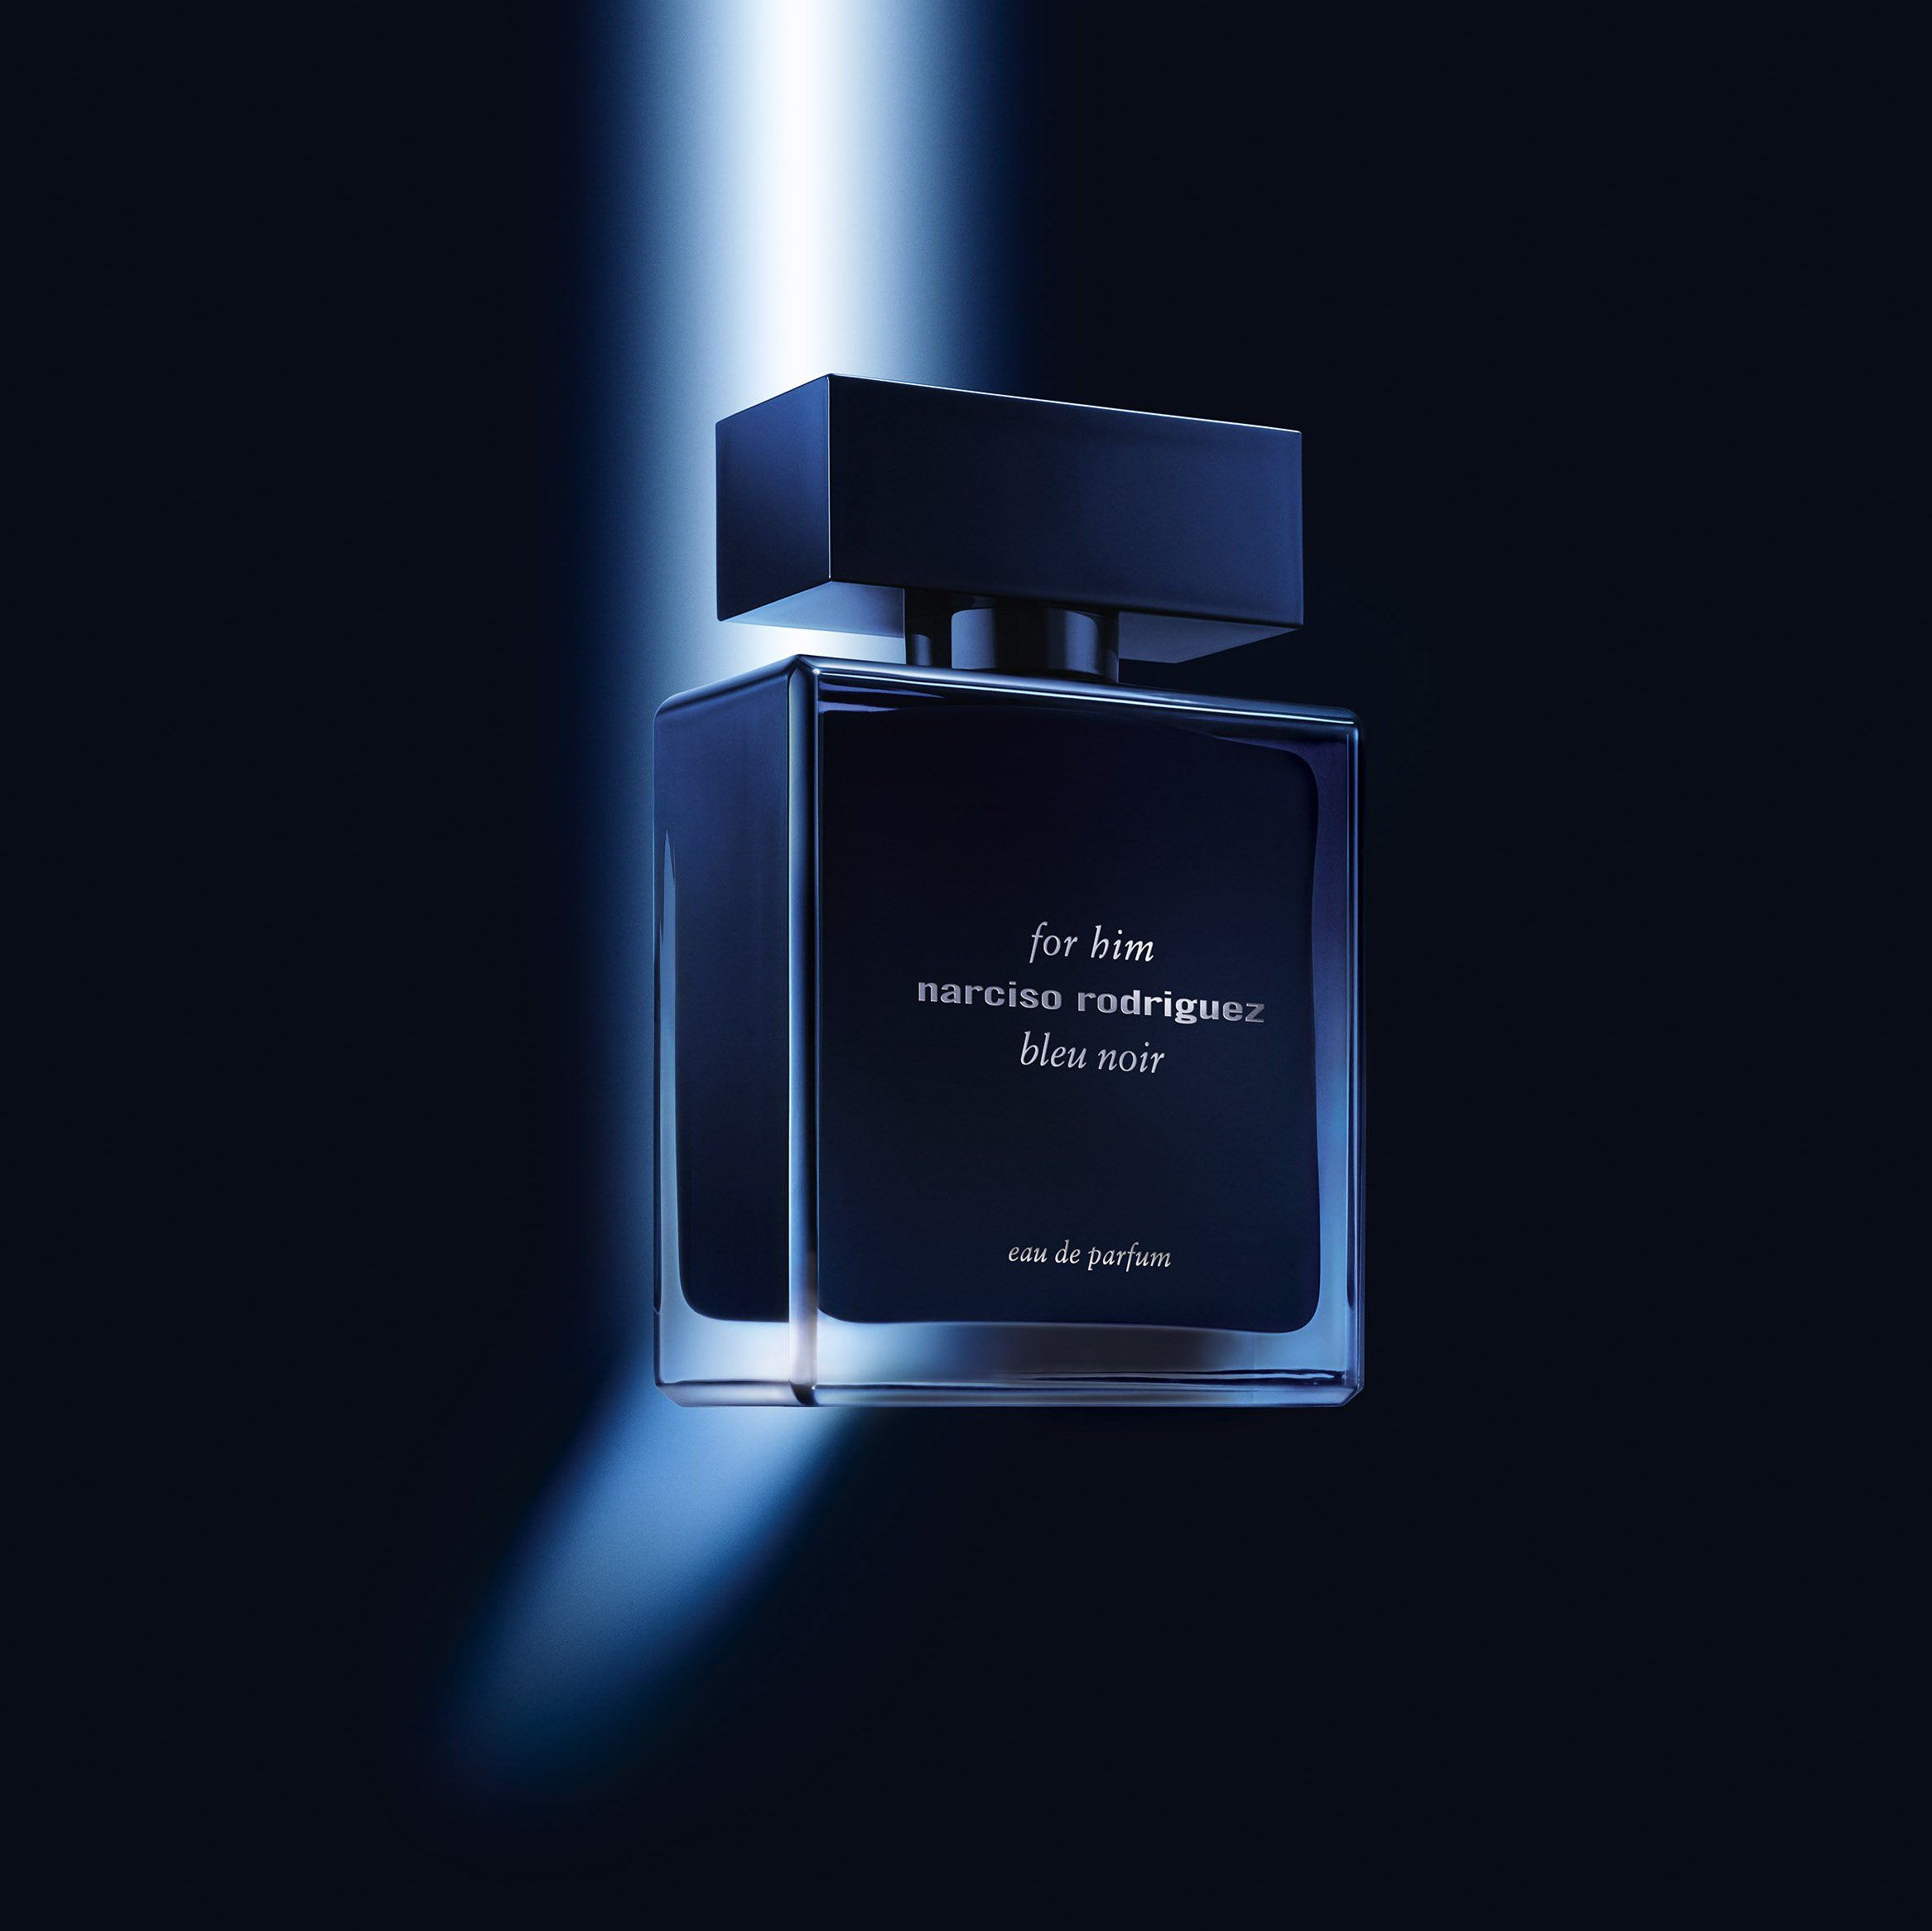 Narciso rodriguez for him bleu. Narciso Rodriguez for him 100ml. Духи Narciso Rodriguez bleu Noir for him. Туалетная вода мужская Narciso Rodriguez for him bleu Noir extreme, 50 мл. Narciso Rodriguez for him EDP.